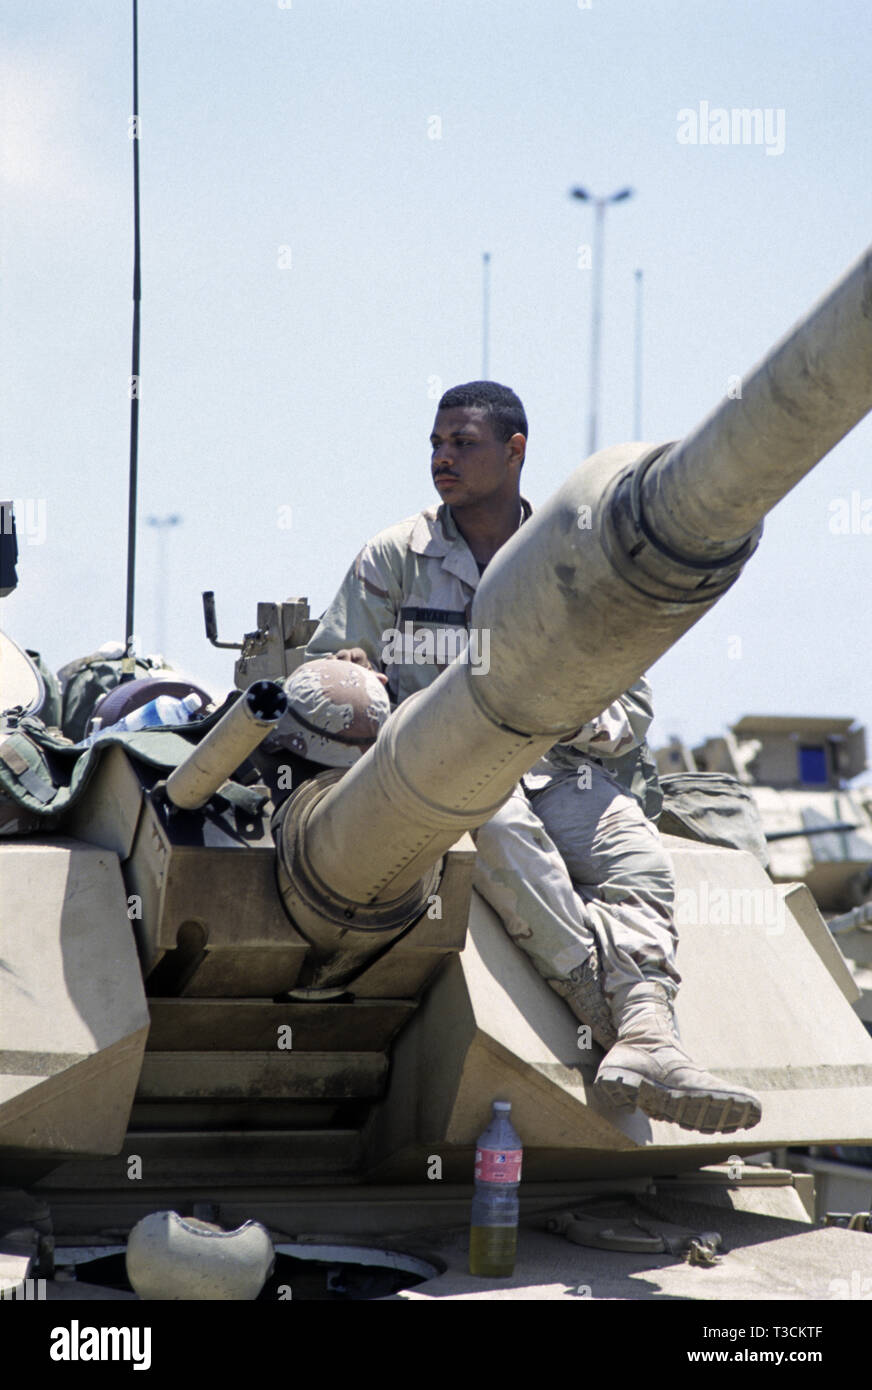 30th October 1993 A black U.S. Army soldier of the 24th Infantry Division, 1st Battalion of the 64th Armored Regiment, relaxes on the turret of his M1A1 Abrams tank in the new port in Mogadishu, Somalia, having just arrived by sea that morning. Stock Photo